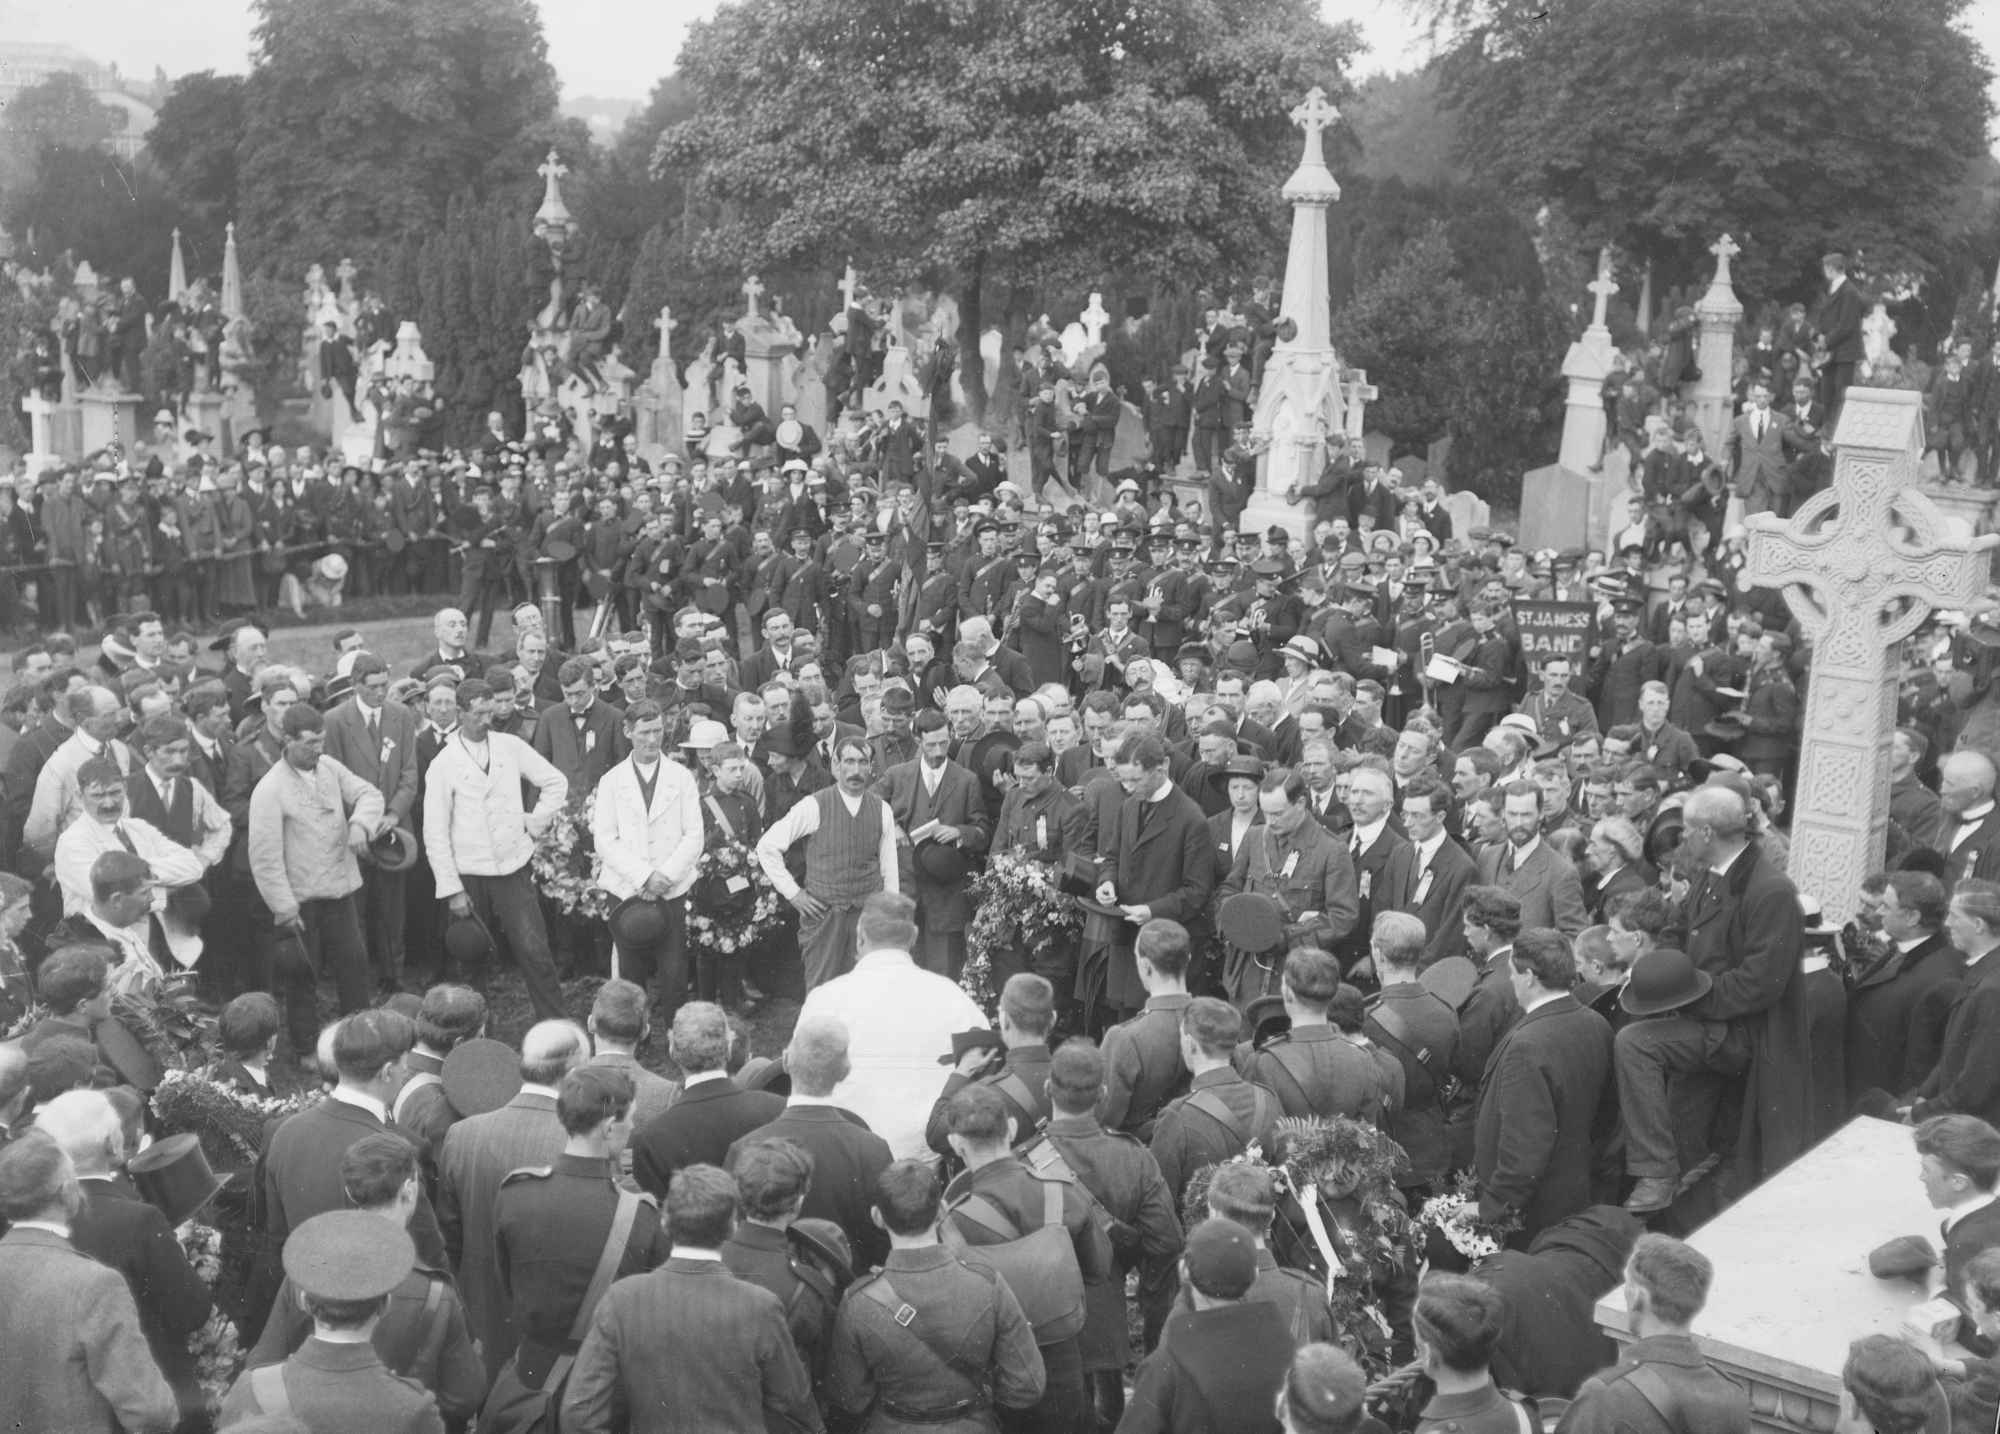 O’Donovan Rossa’s funeral at  Glasnevin Cemetery in Dublin, with Pádraig Pearse (standing to the right of the priest, his hat in front of him), John MacBride (to the right of Pearse), and Tom Clarke (three to the right of MacBride, in profile).